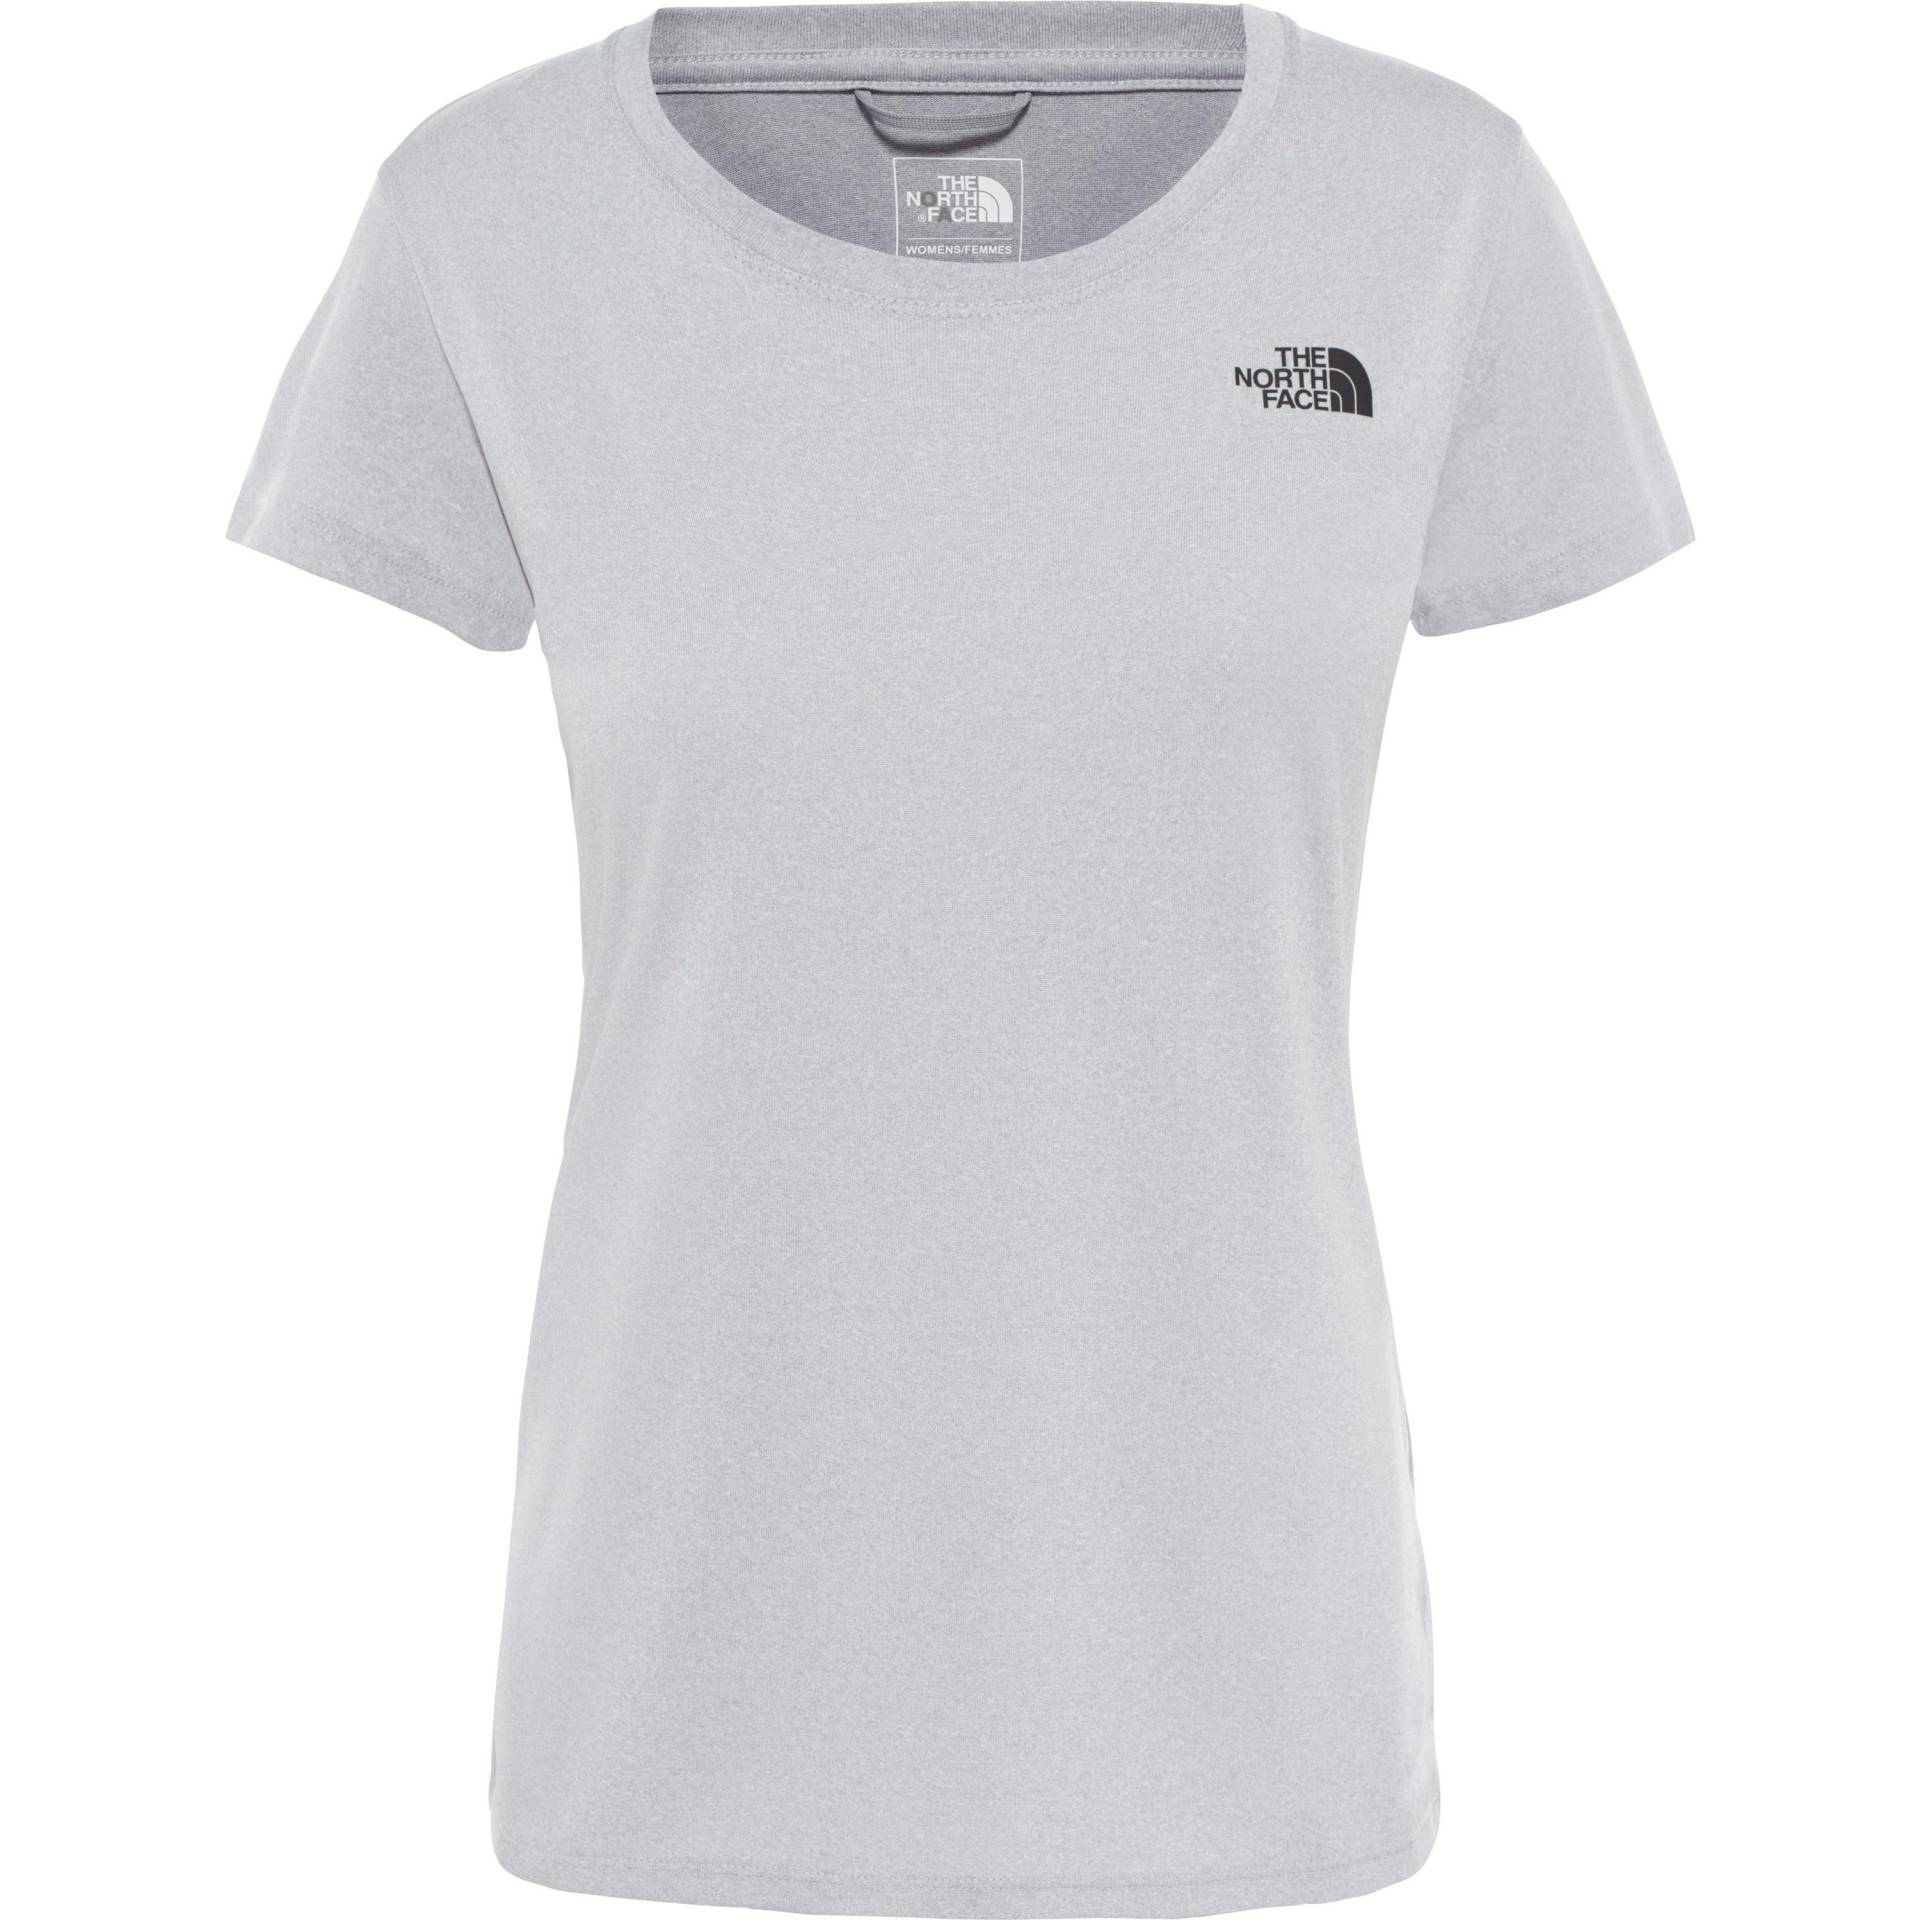 The North Face REAXION AMP Funktionsshirt Damen von The North Face